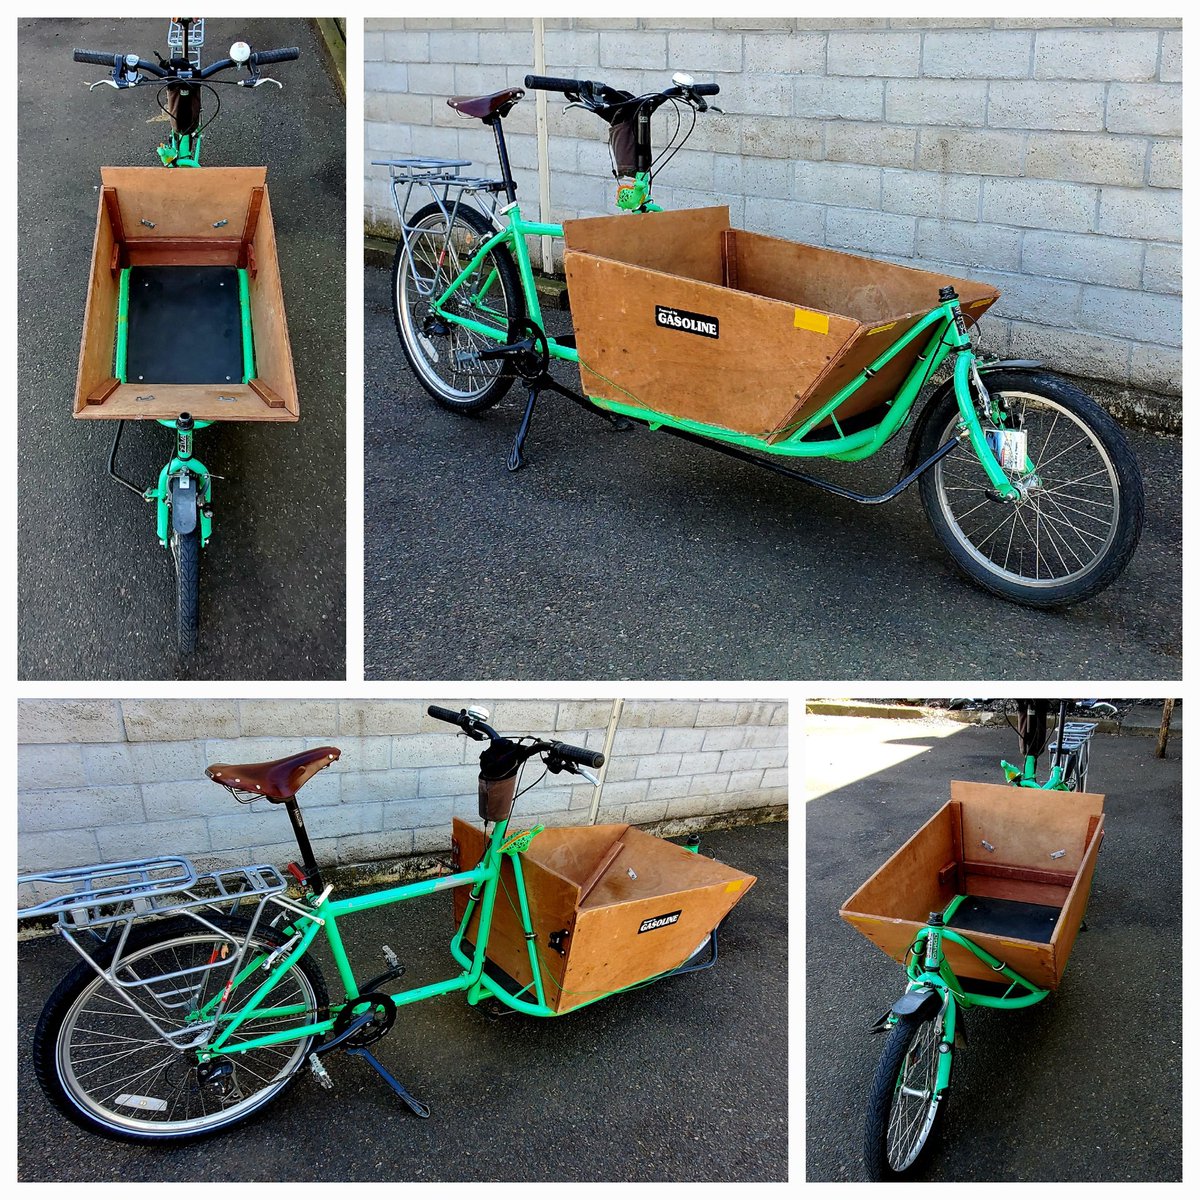 Here's CETMA cargo bike number one, the first ever, made 15 years ago, about to get a new powder-coat and kickstand. The owners, a Sacramento family, recently dropped it off to CETMA headquarters. I'll return it when the bike's done - it'll easily last another 15 years.